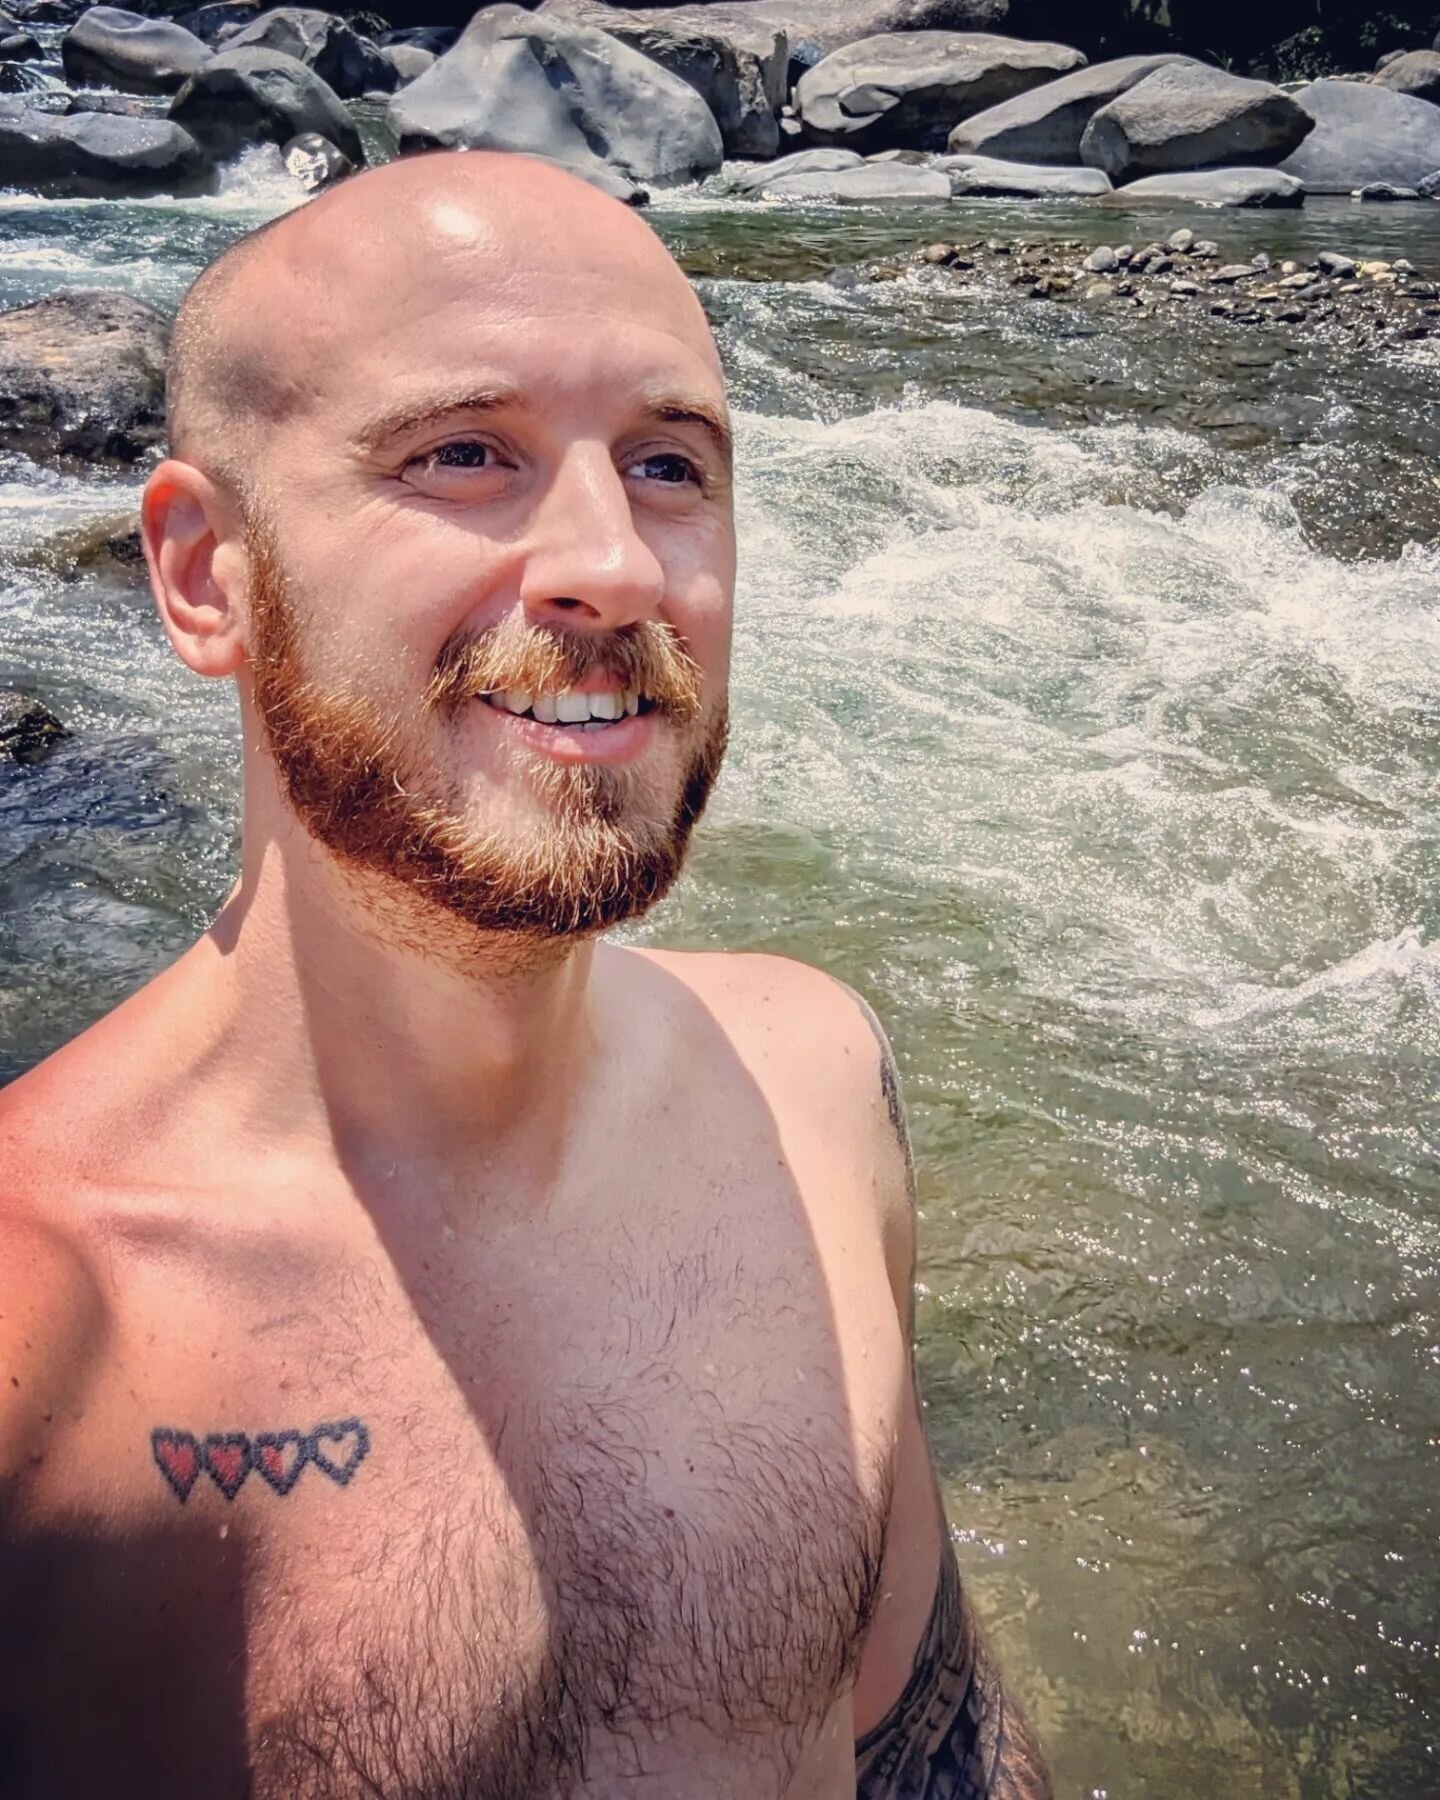 Not pictured: the rest of me, because I was naked and free in this Costa Rican river today.